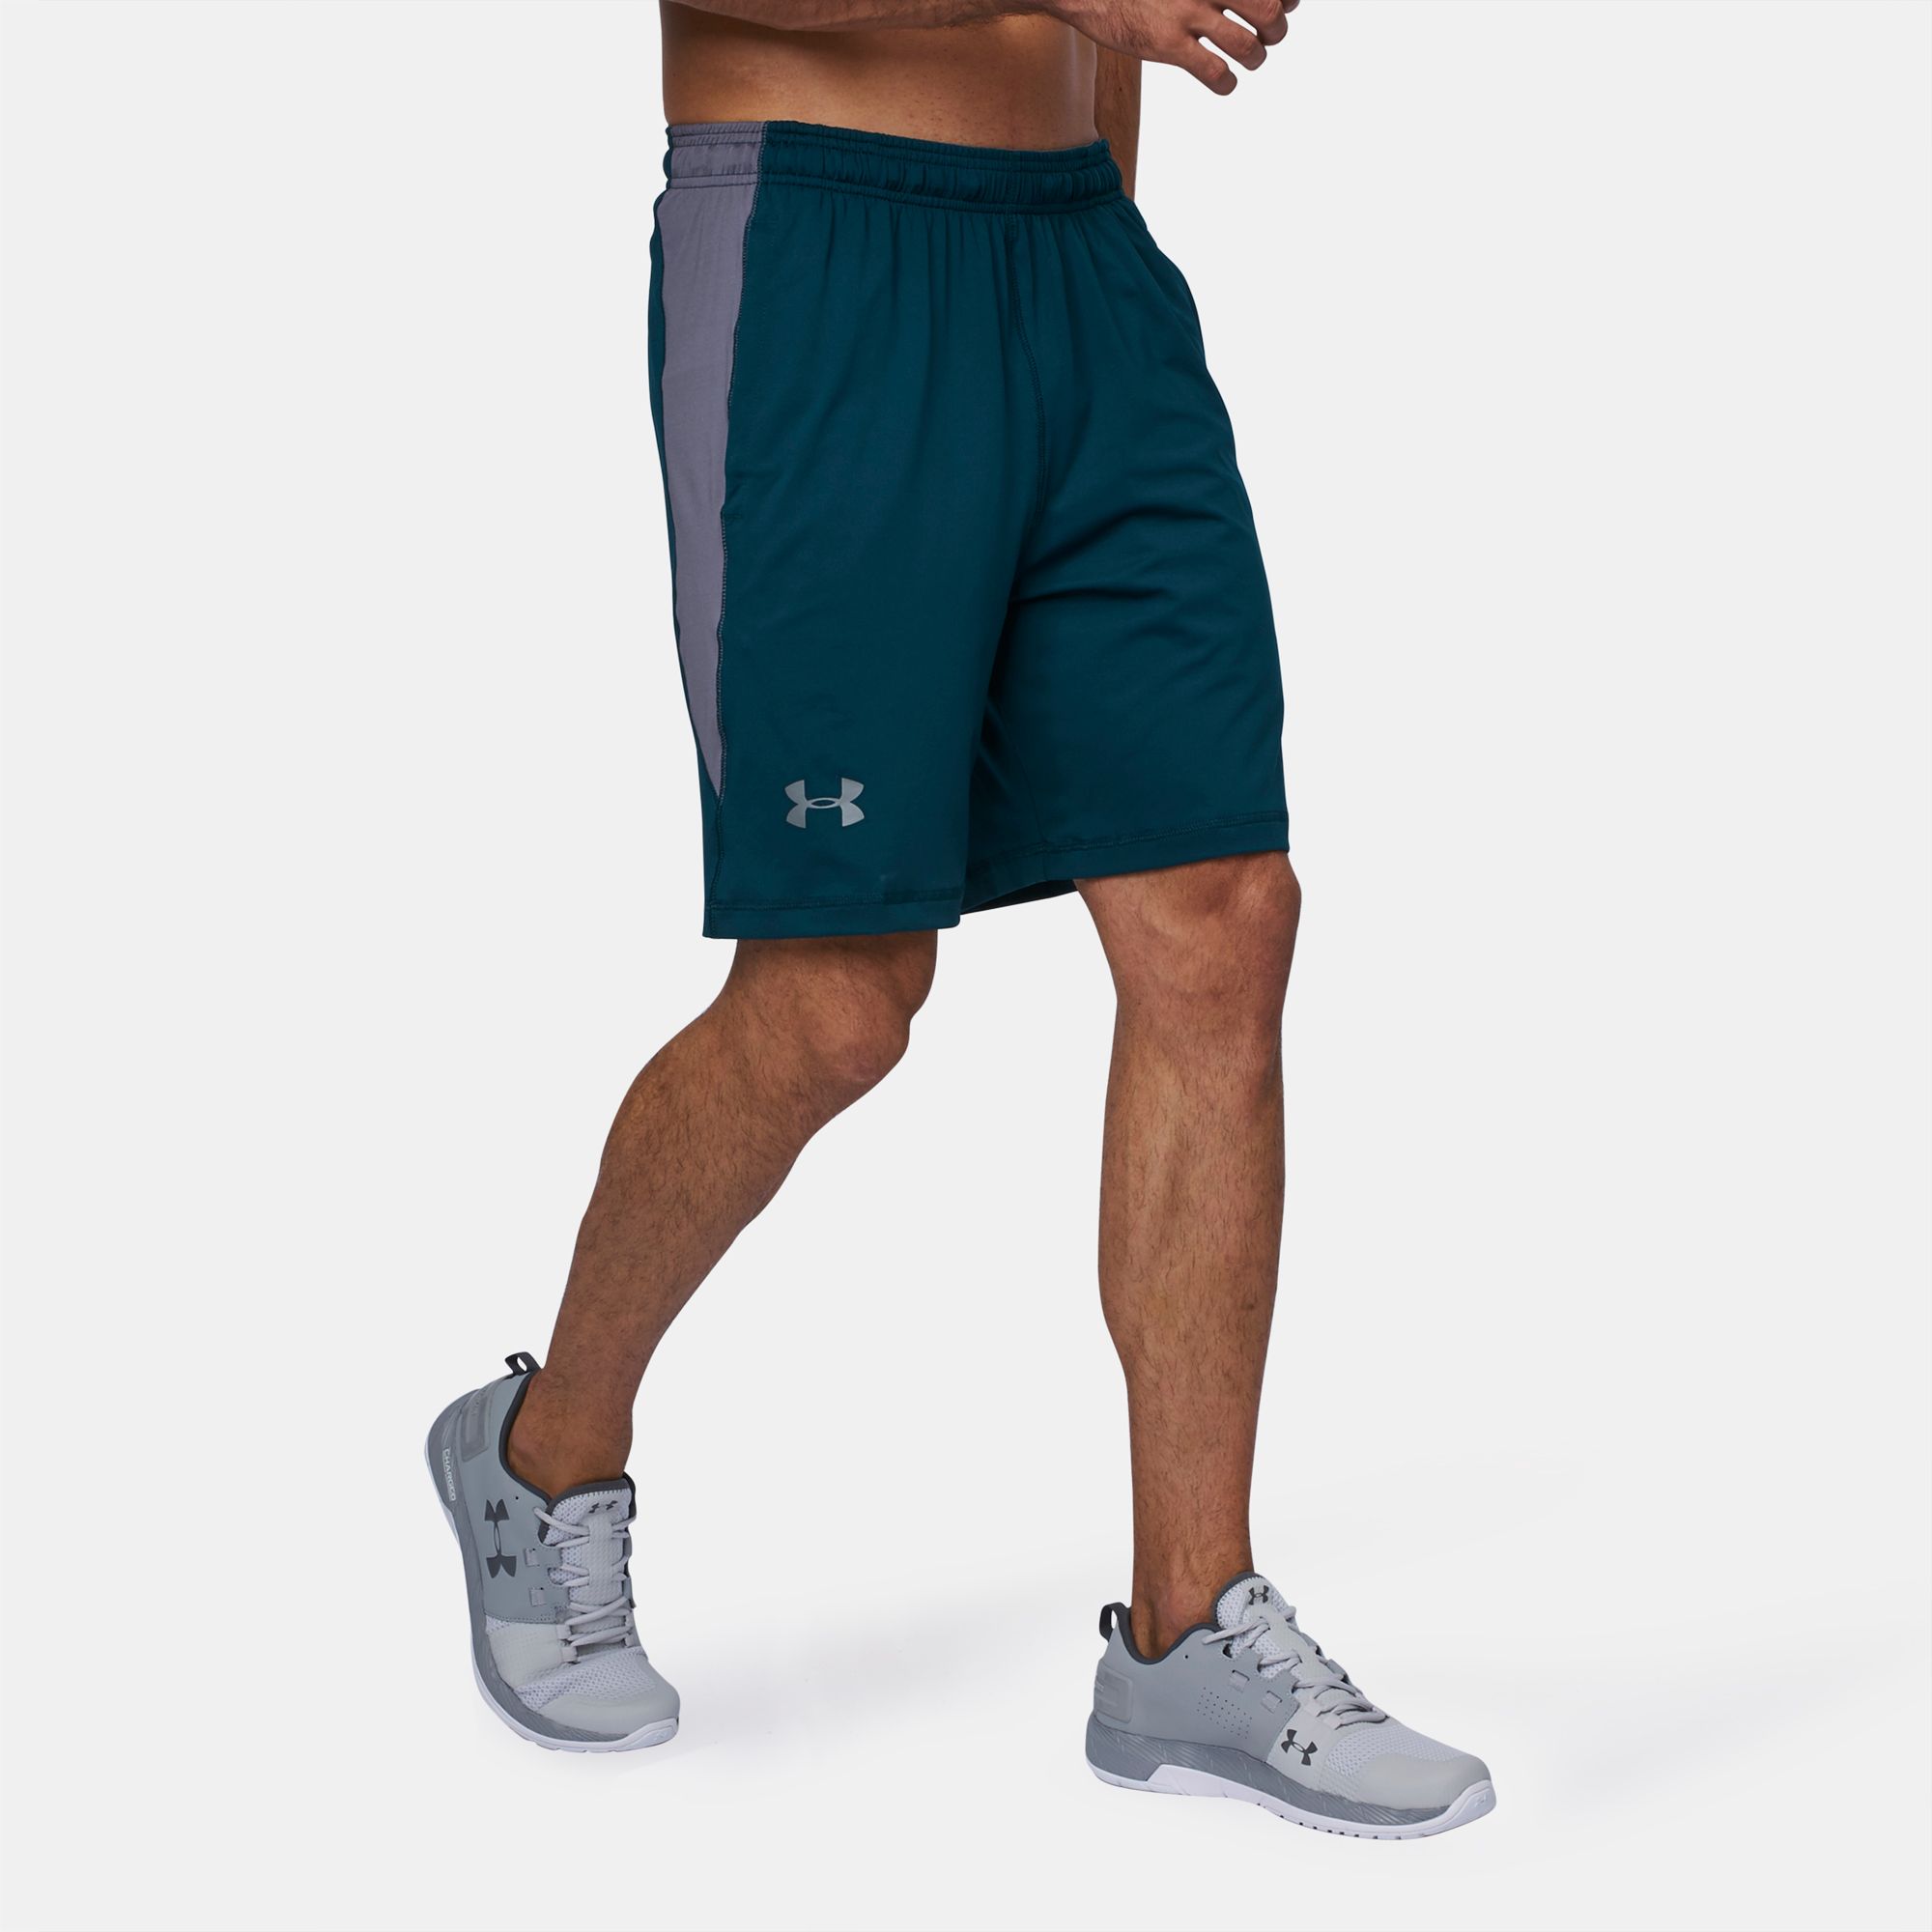 under armour 8 inch shorts